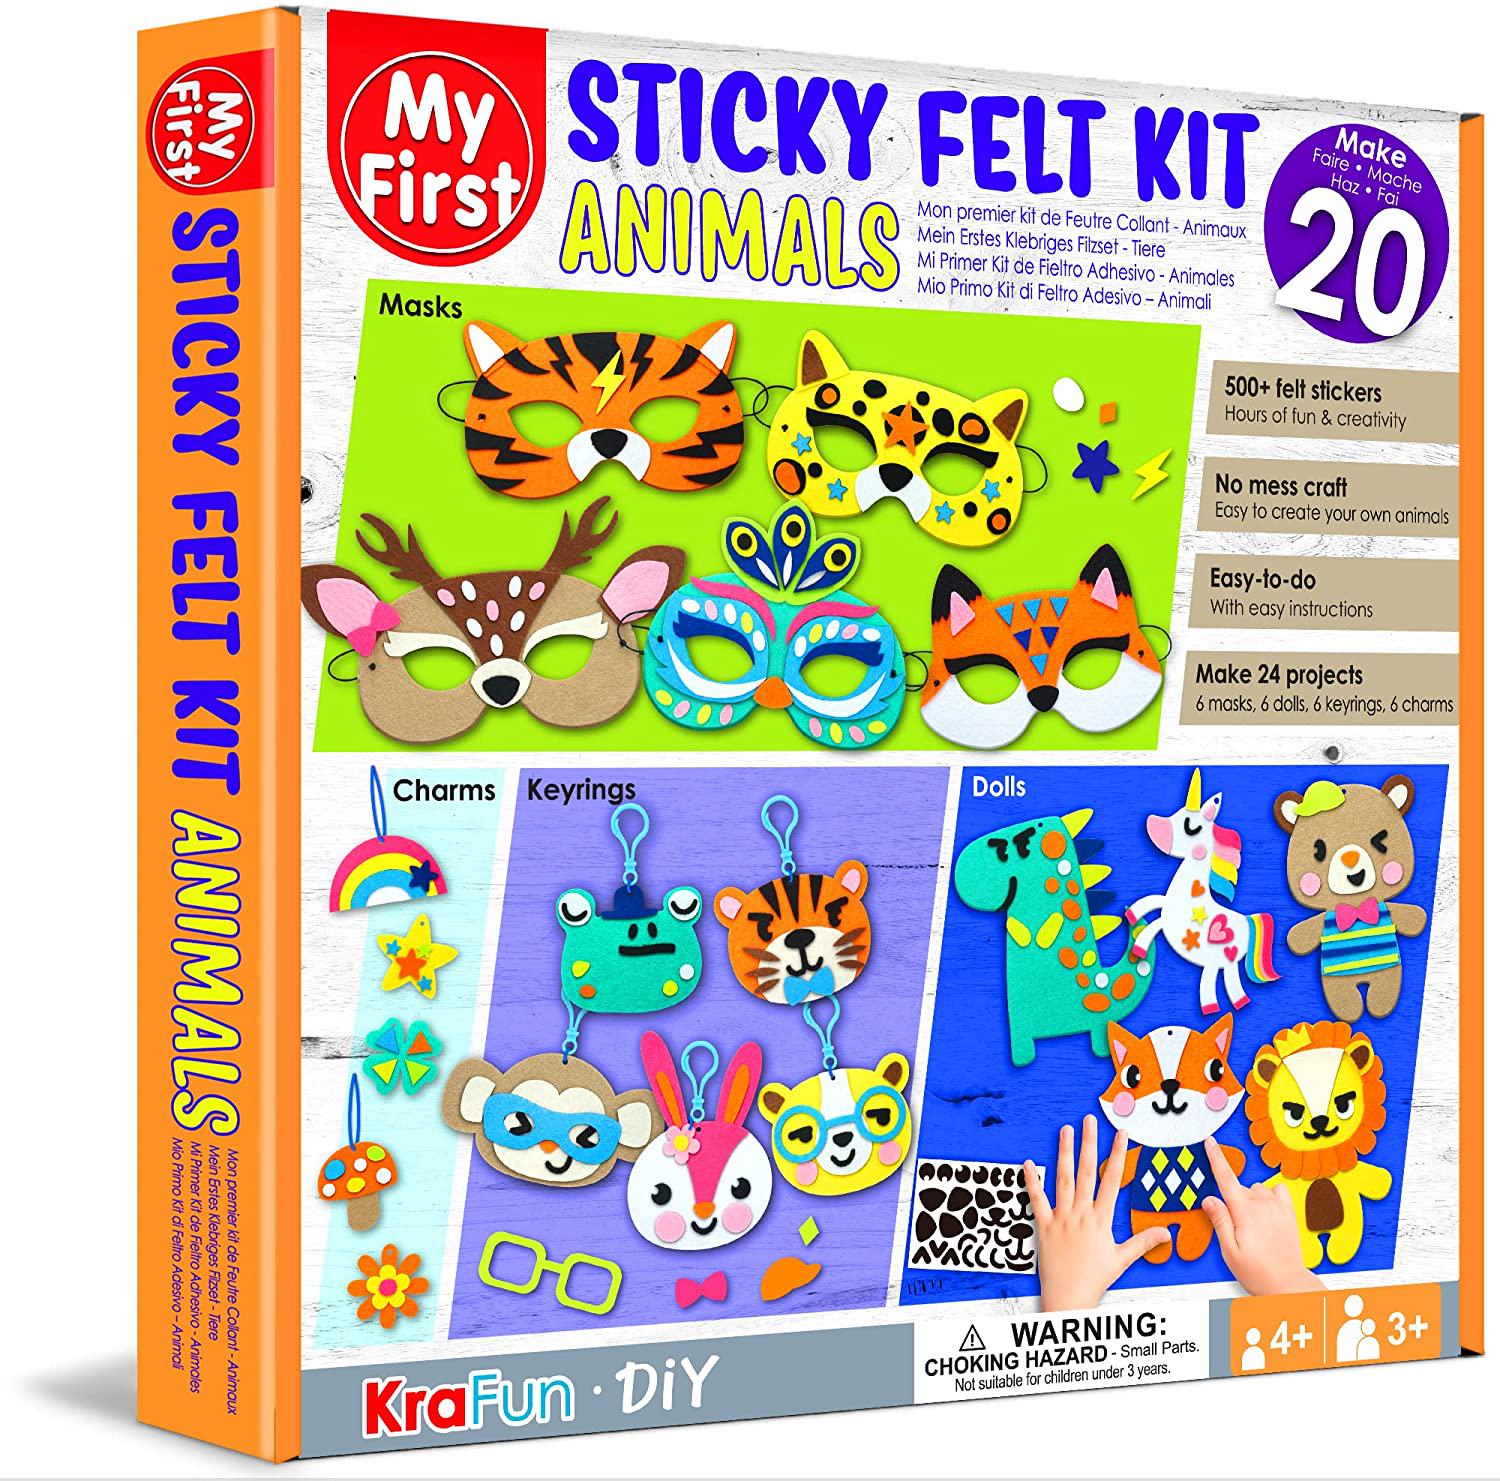 KRAFUN, KraFun Beginner My First Sticky Felt Kit Animal for Kids Art and Craft, Includes 24 Easy Projects for Party Masks, Dolls, Keyrings and Charms, Instruction and Felt Materials for Learning DIY Skills